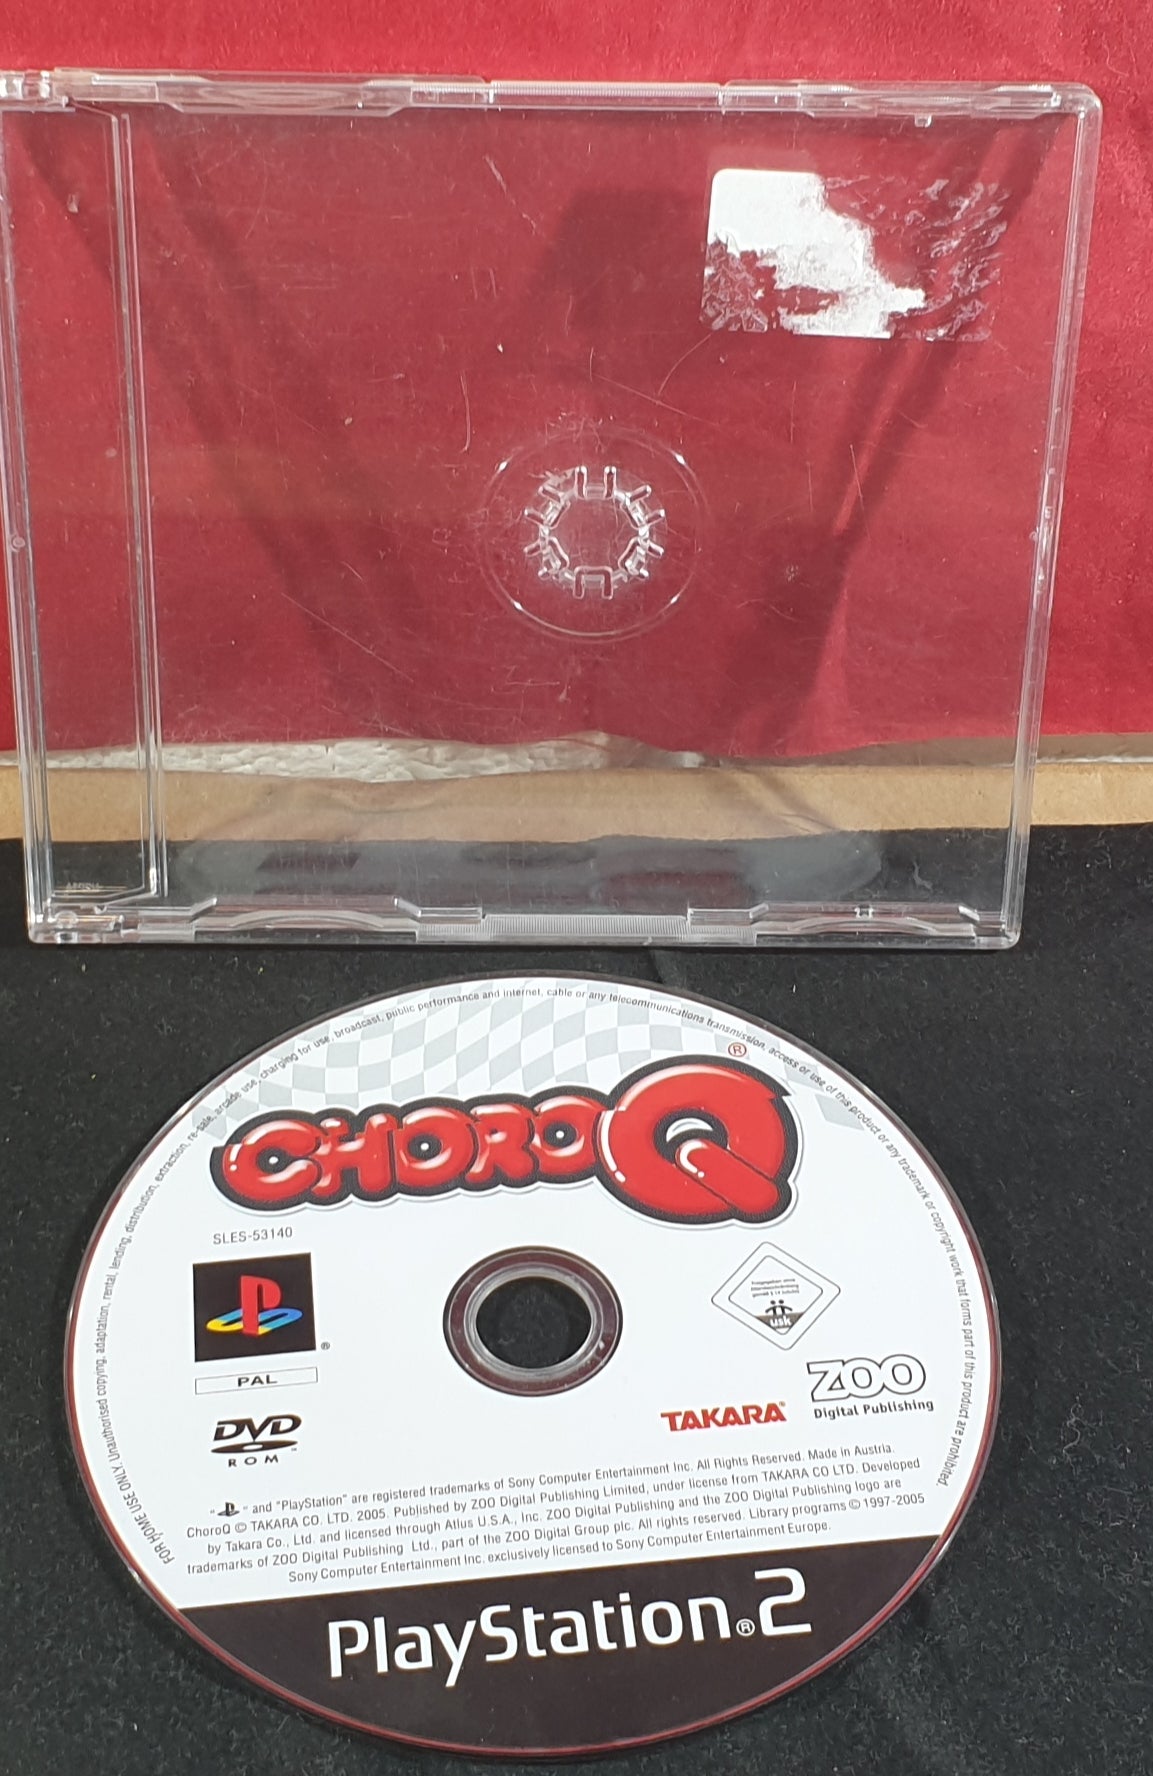 Choro Q Disc Only Sony Playstation 2 (PS2) Game